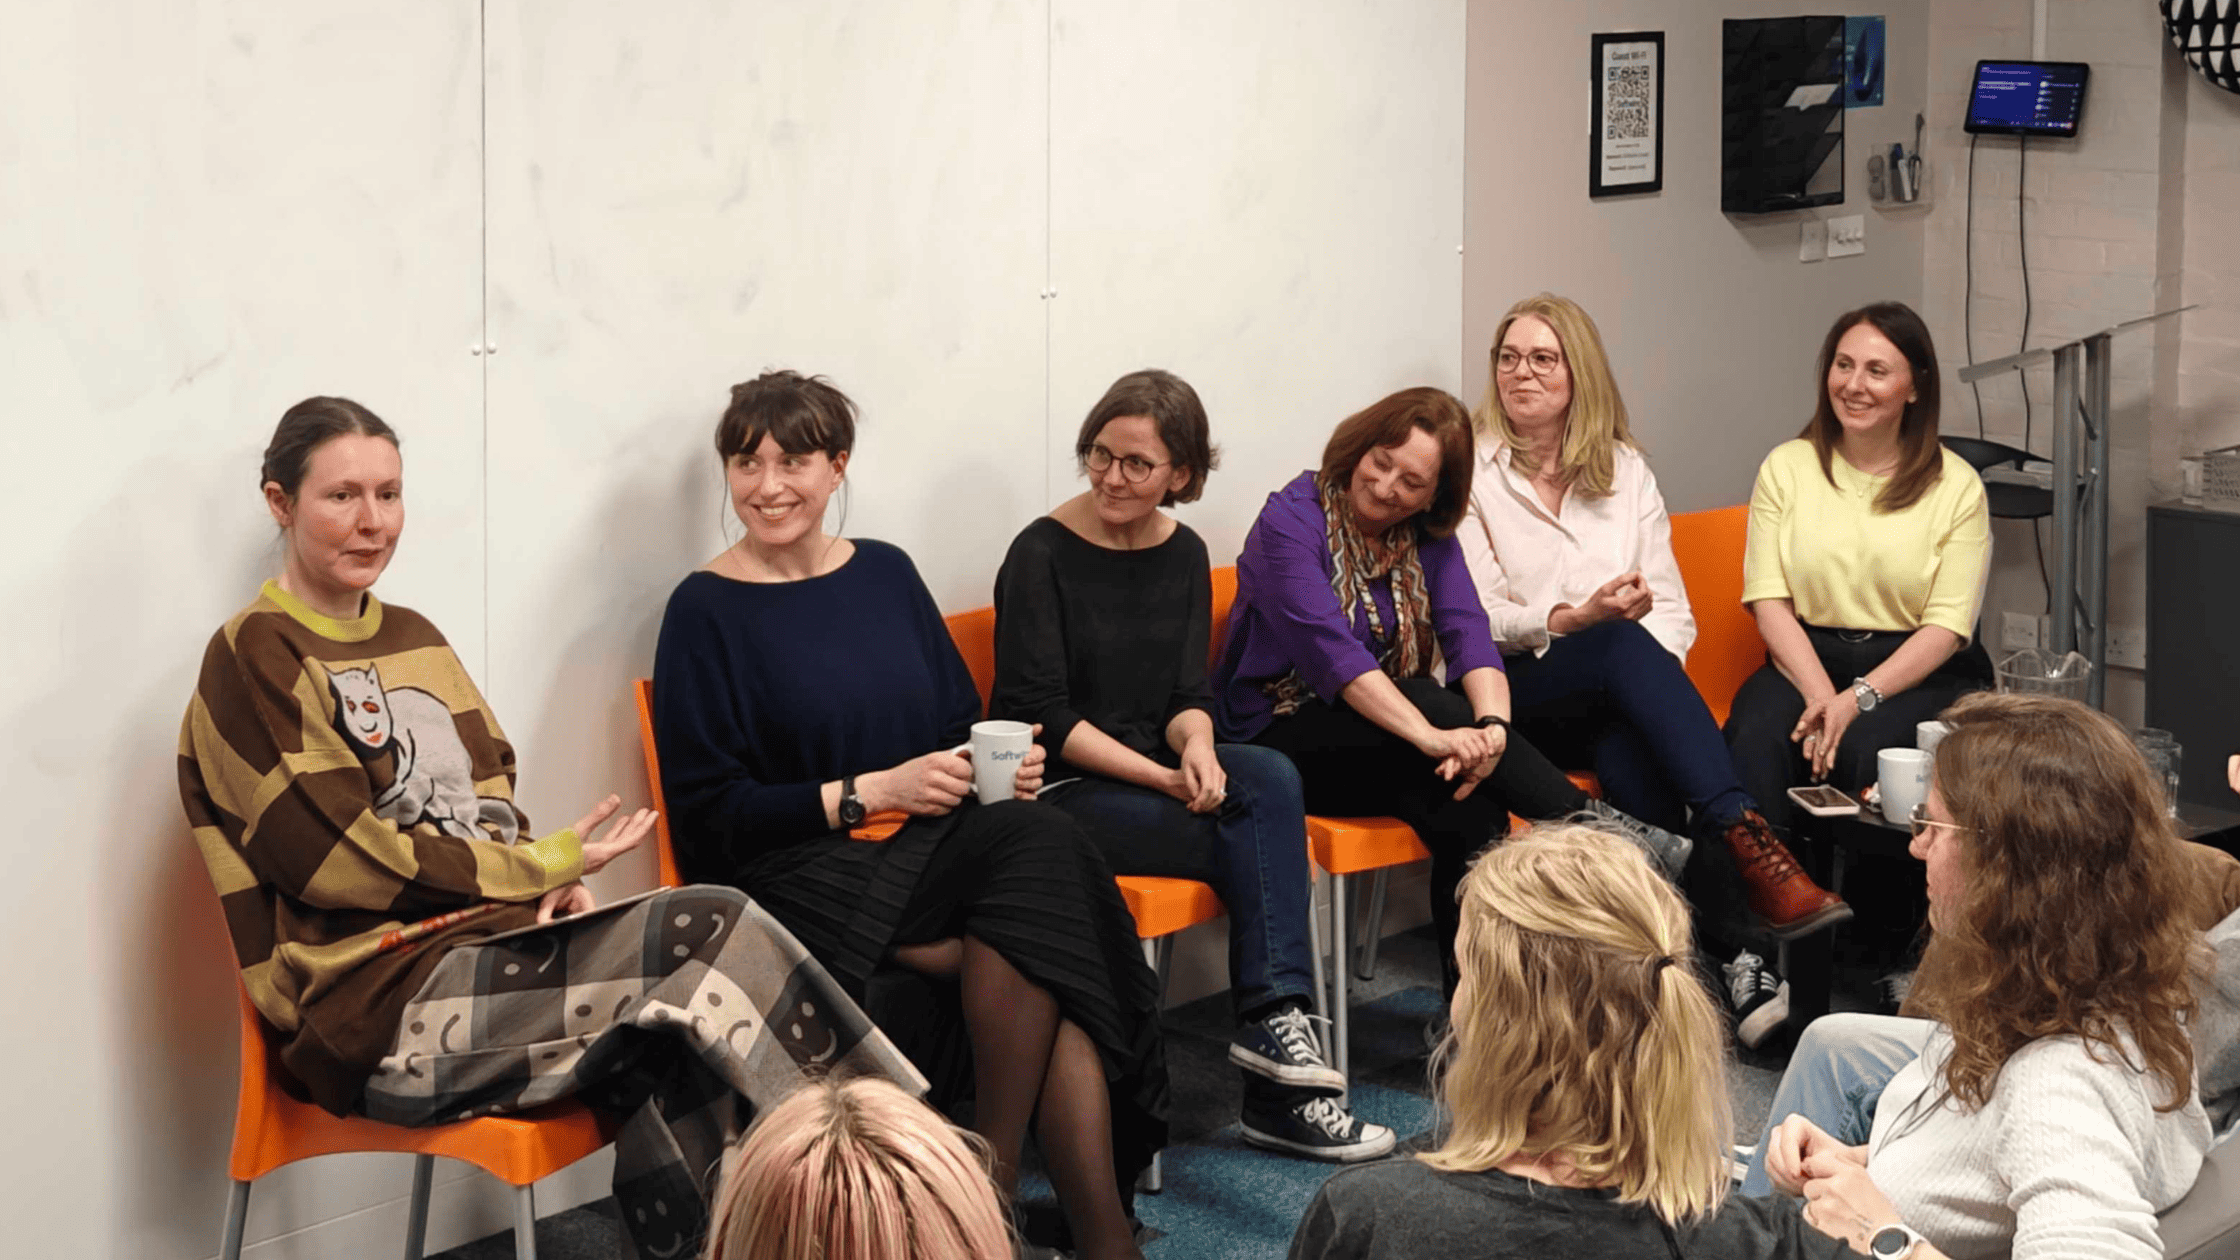 A panel discussion taking place in a modern, casual office environment. A diverse group of approximately 30 people sits in rows of soft, modular seating. They are attentively facing two women who are seated at the front of the room. One woman, speaking, holds papers and a mug, while the other listens. The room has a relaxed vibe, with a mix of standing lamps and plants, a clock on the wall reading ten past ten, and coats hung neatly on a rack in the background.